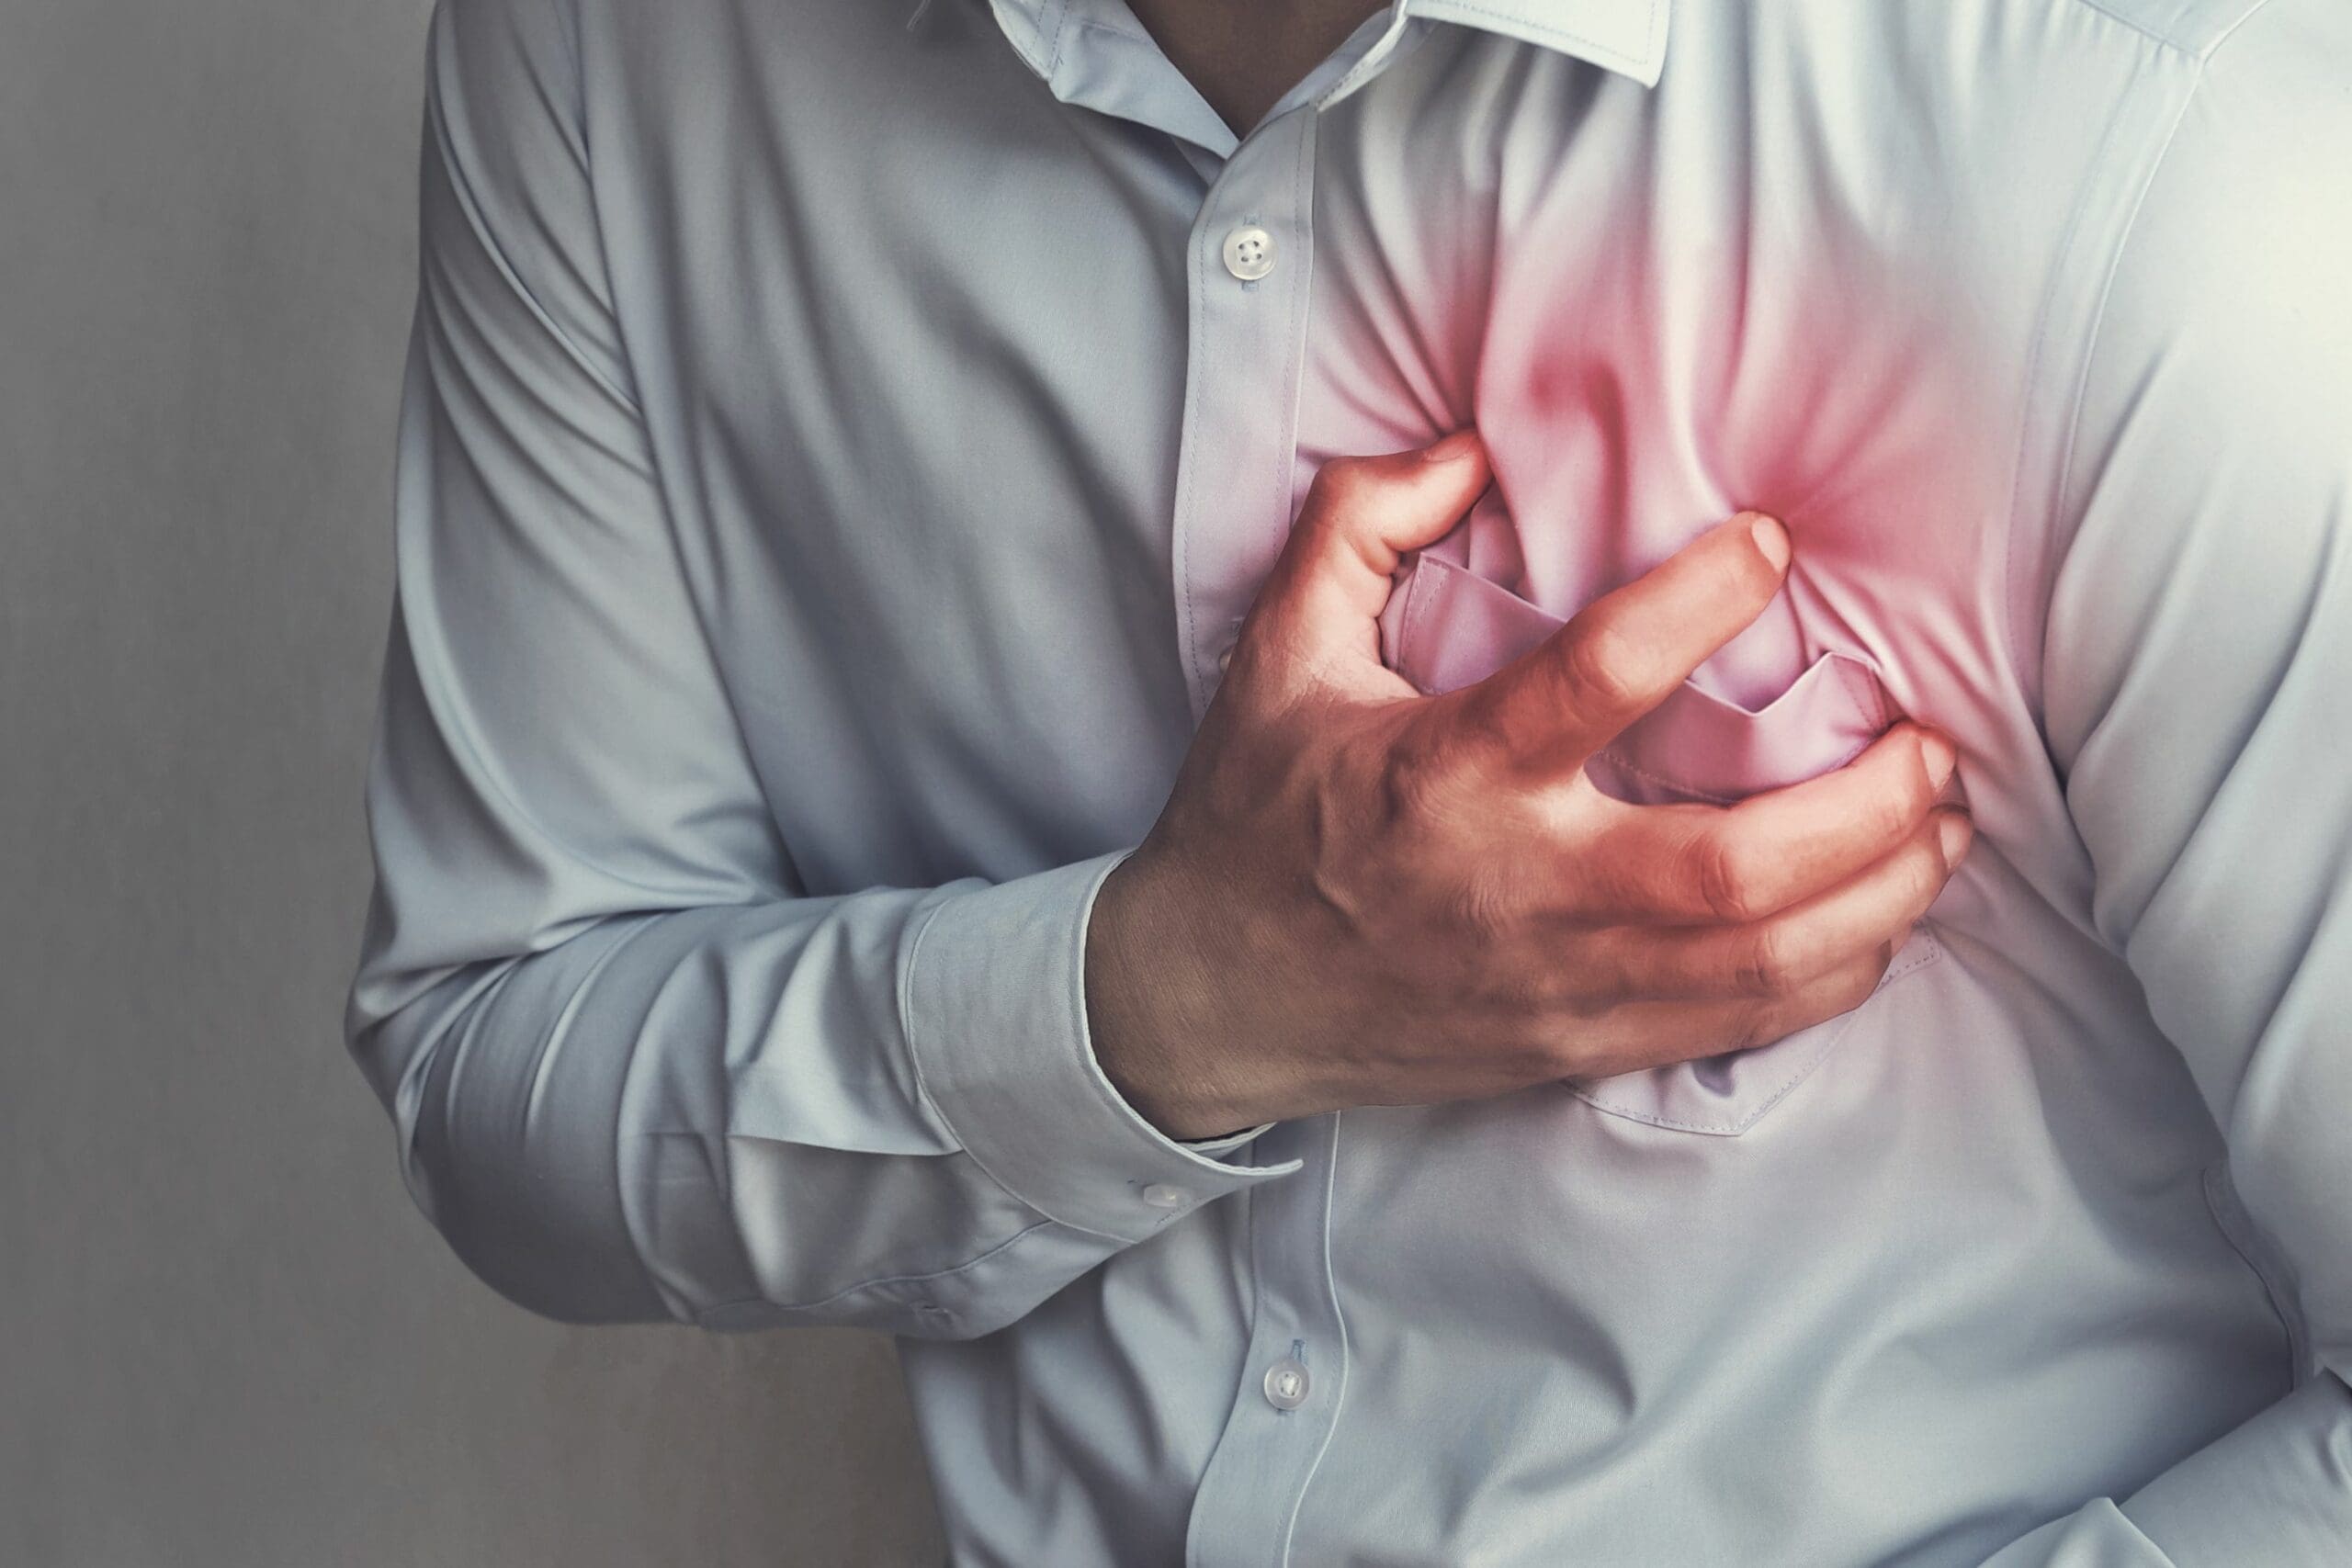 What is angina? A brief video by Prof. David Celermajer